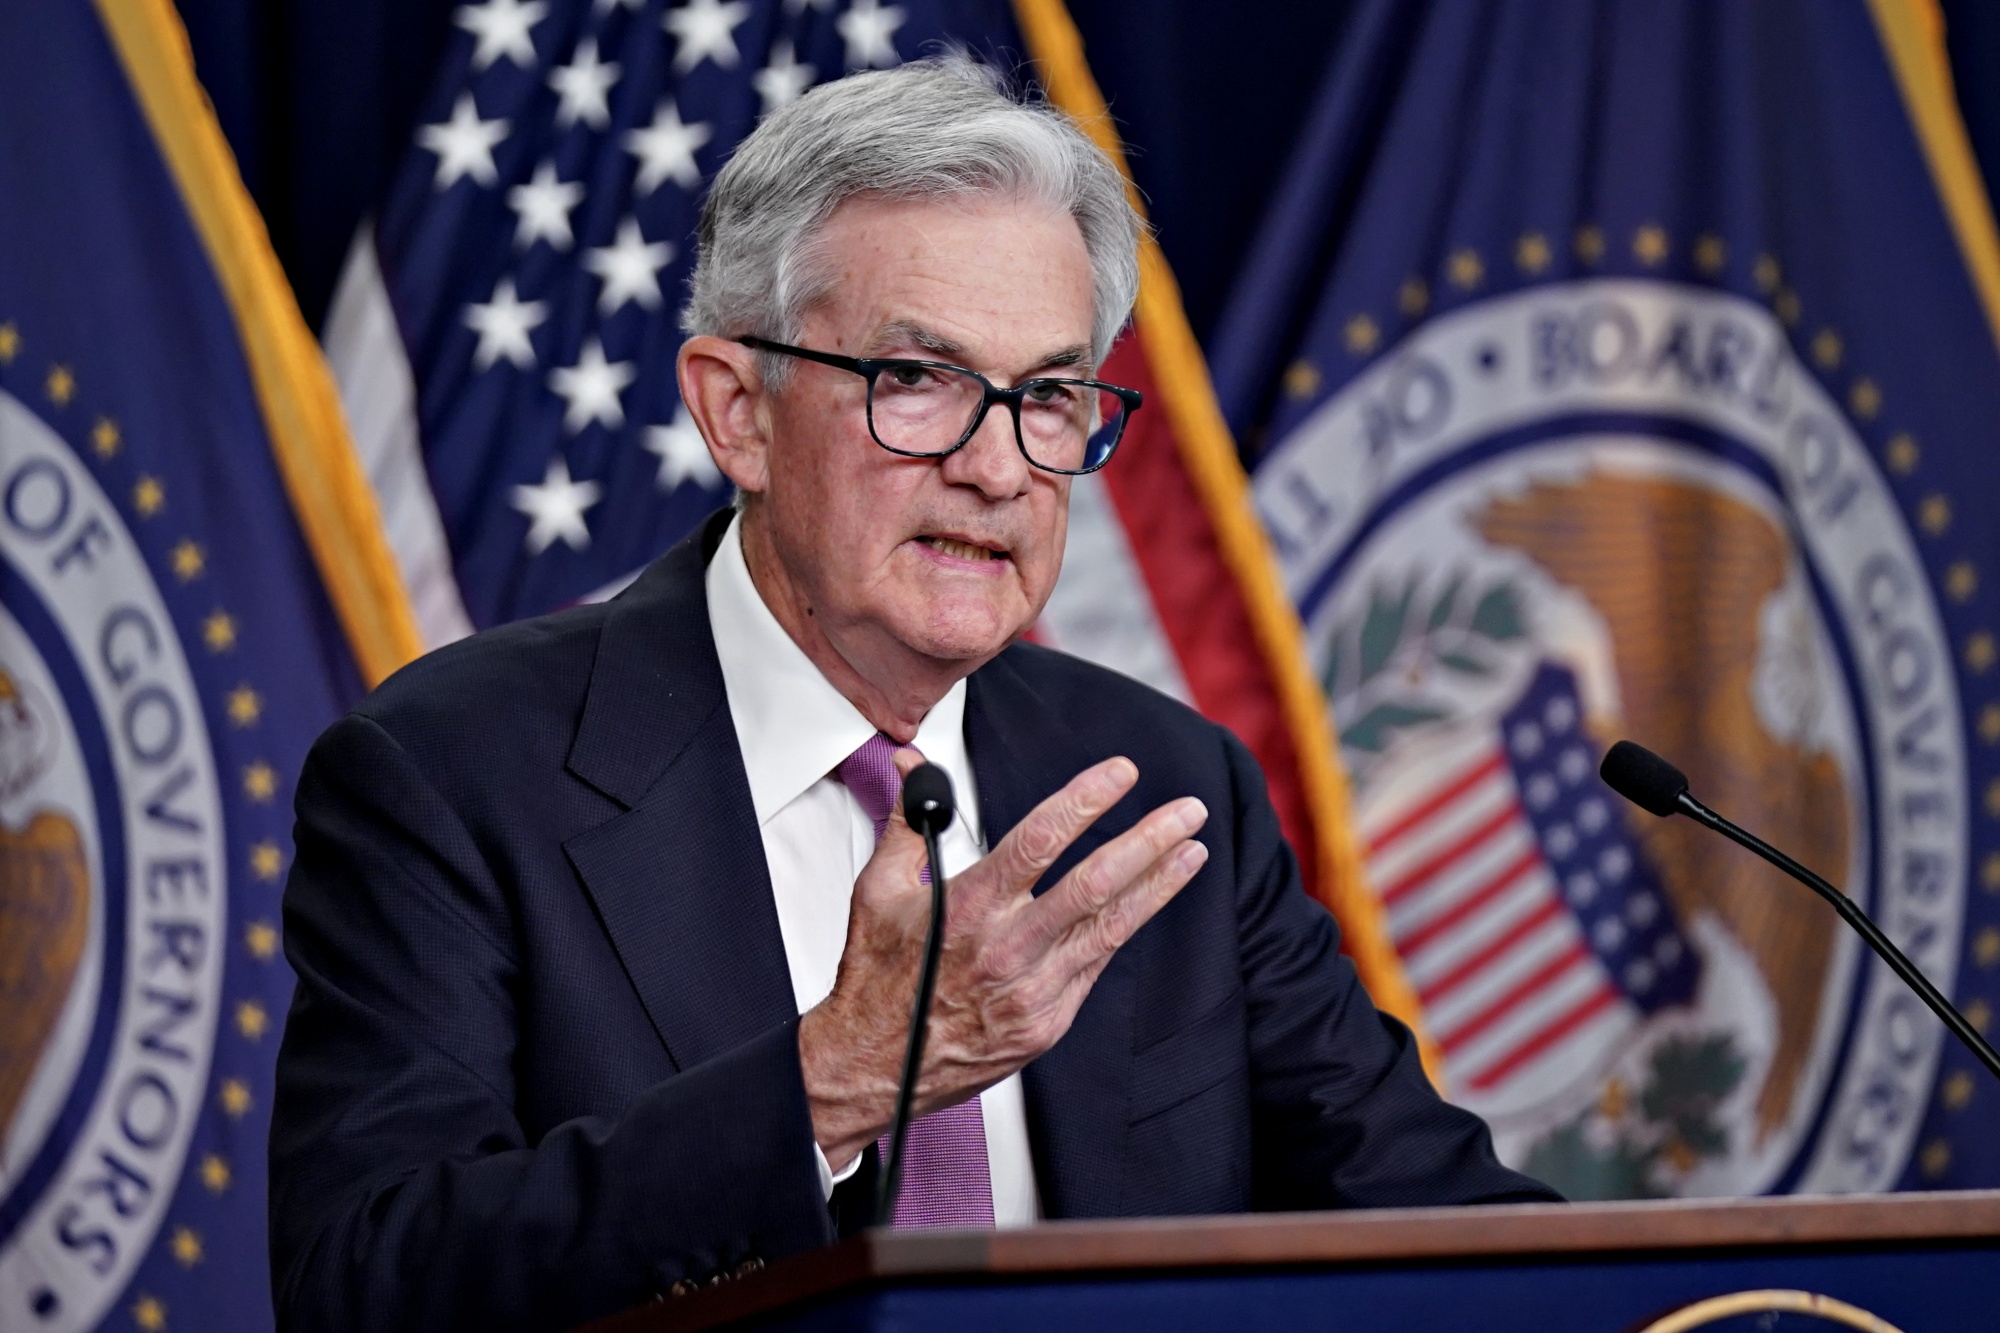 Jerome Powell, Chair of the Federal Reserve, speaks during a press briefing in Washington, D.C. 

Image Source: Bloomberg